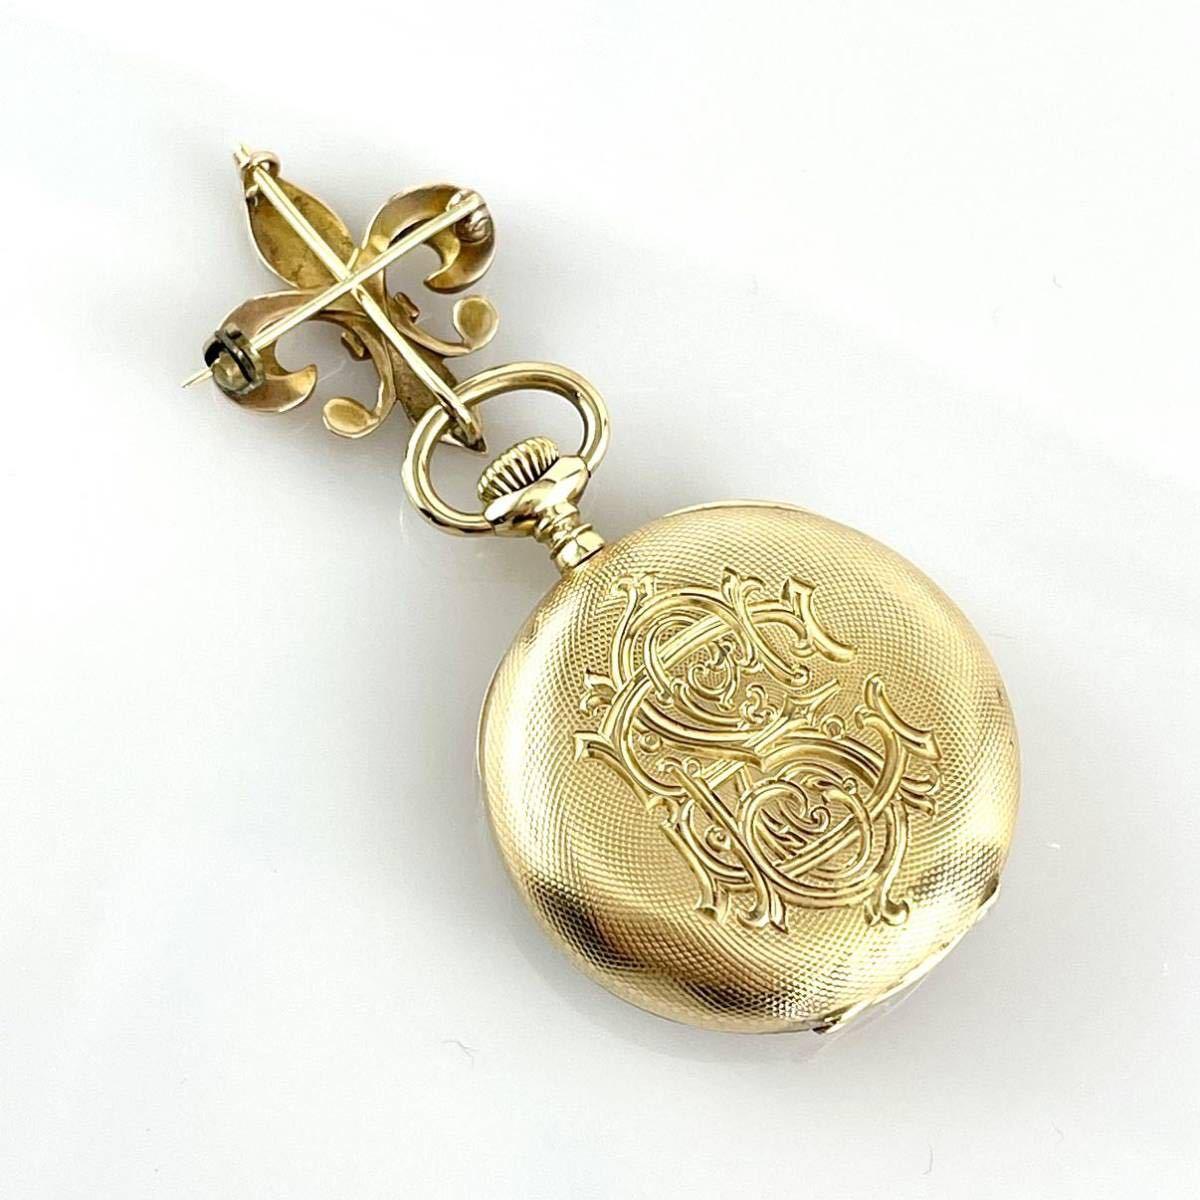 Patek Philippe Pocket Watch Precious 18K Gold Solid Antique 1902 Manual Rare - Murphy Johnson Watches Co.